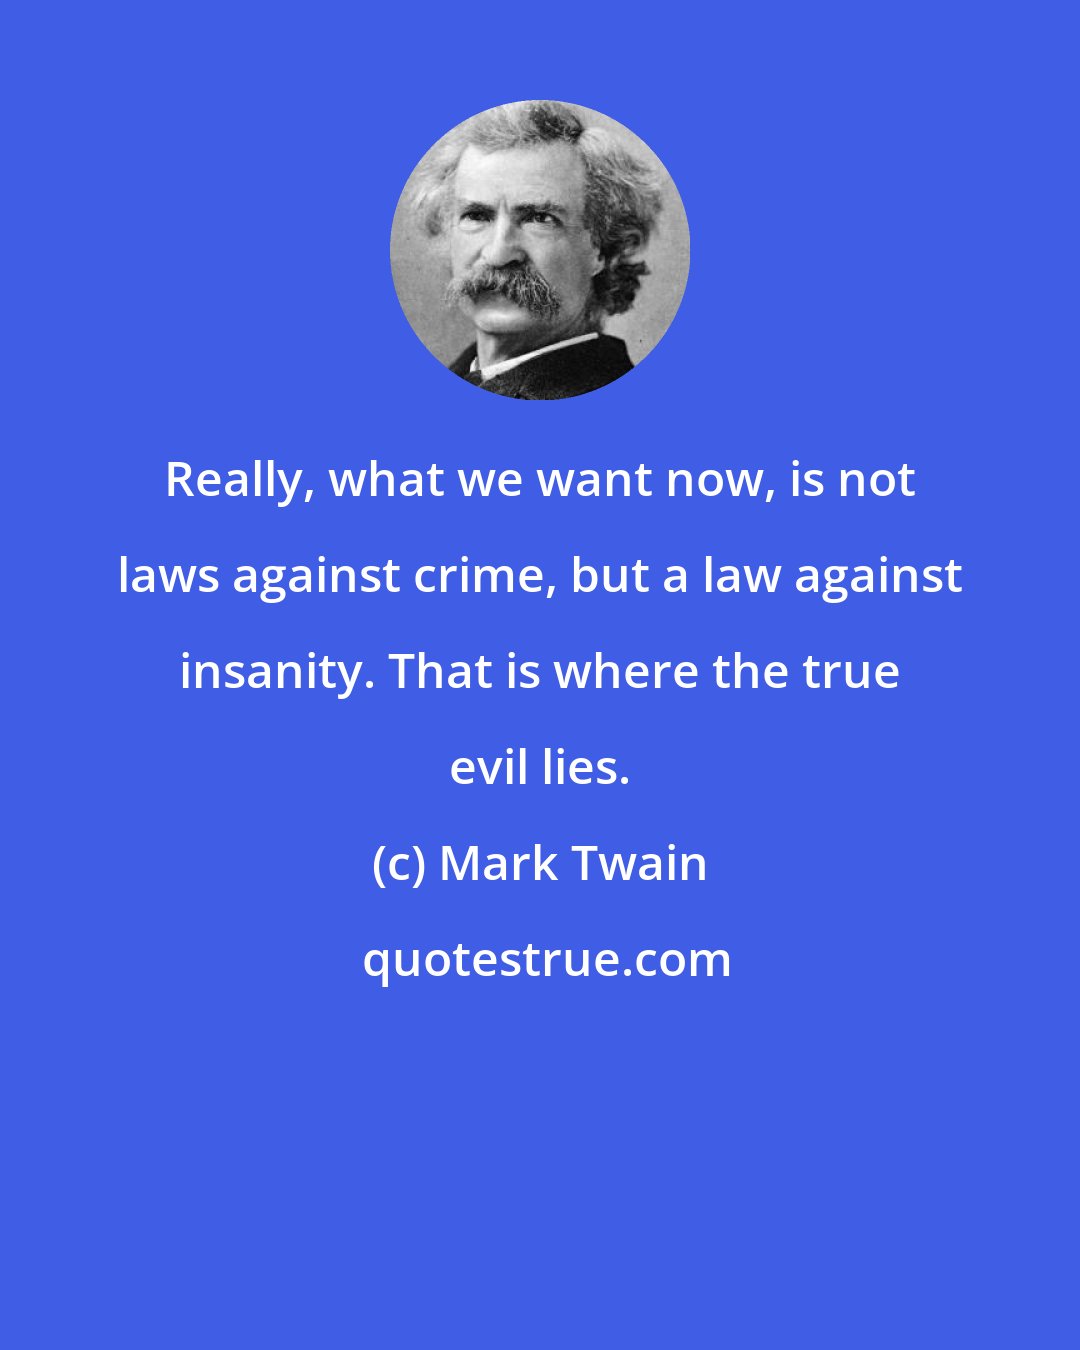 Mark Twain: Really, what we want now, is not laws against crime, but a law against insanity. That is where the true evil lies.